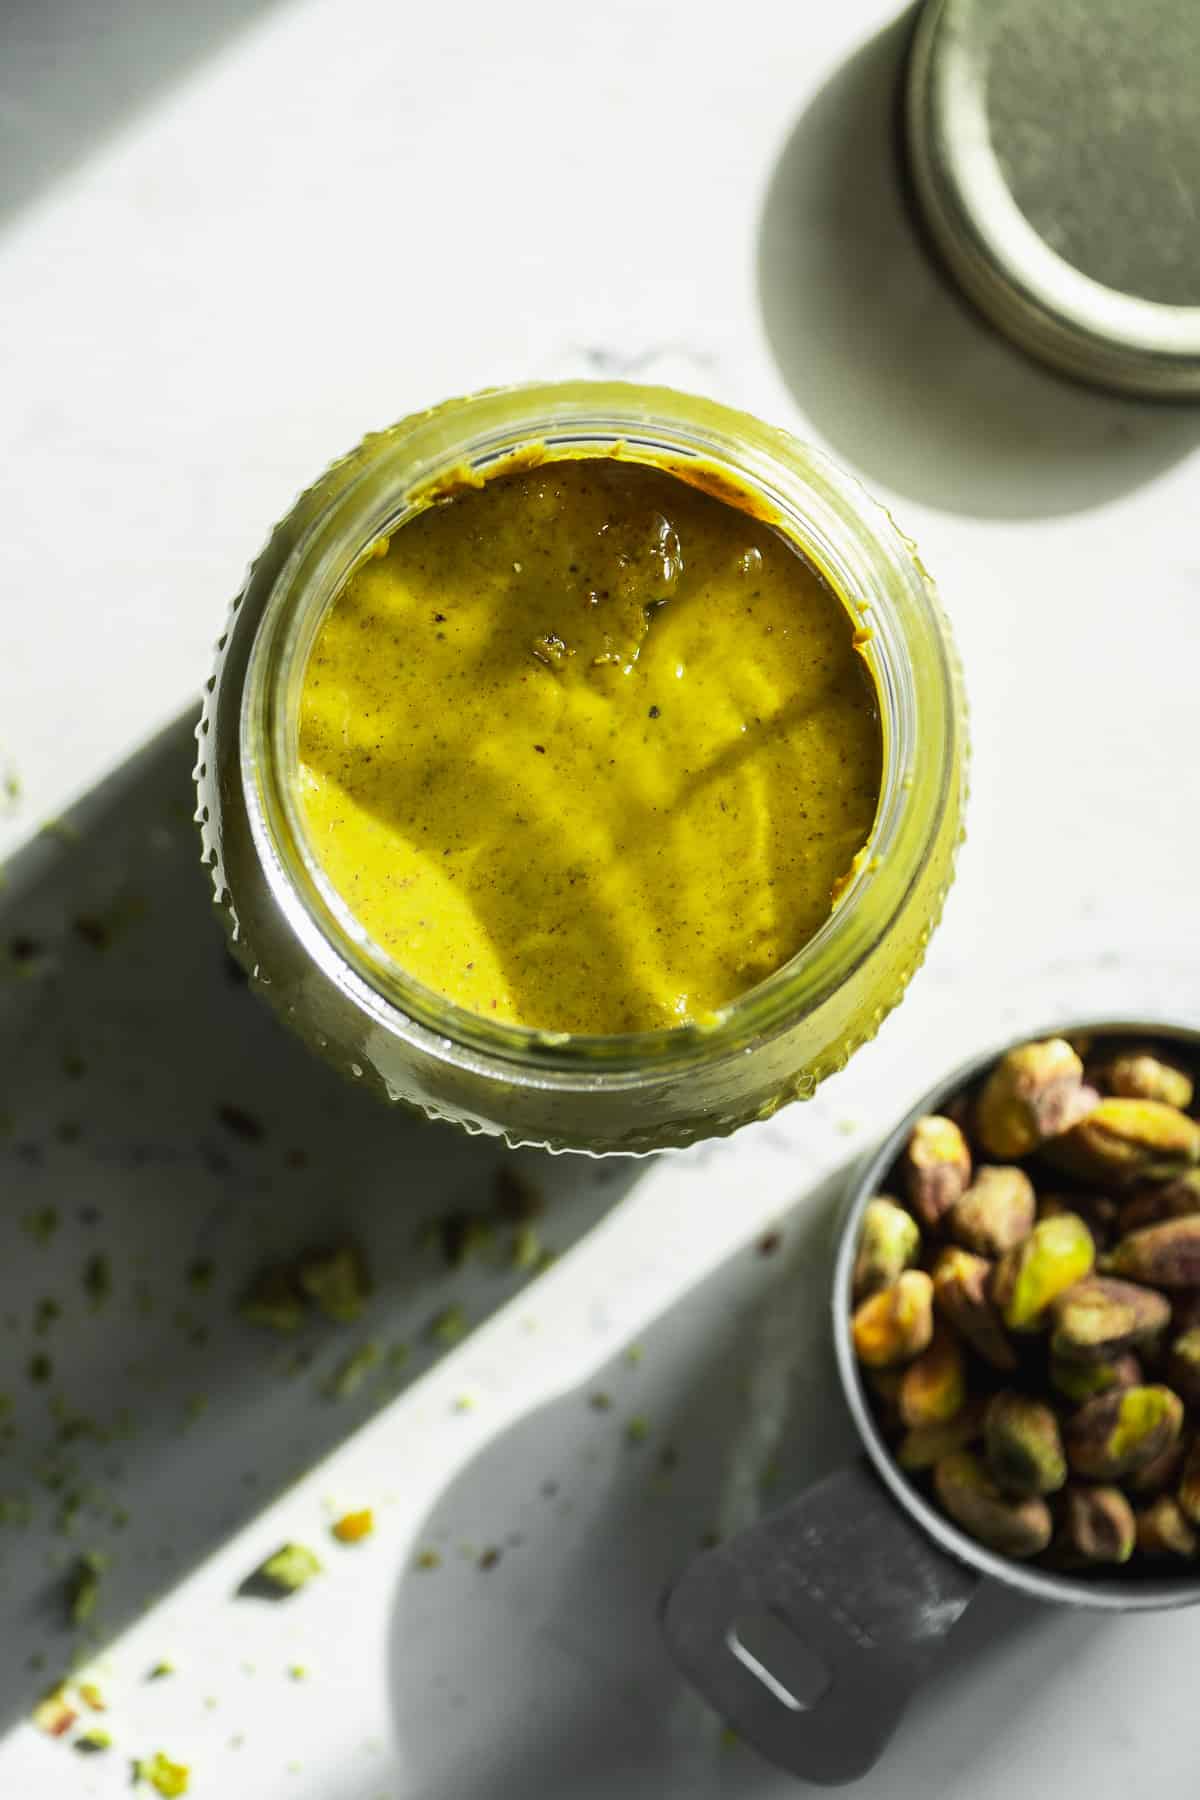 Jar of pistachio butter from above with the lid off.